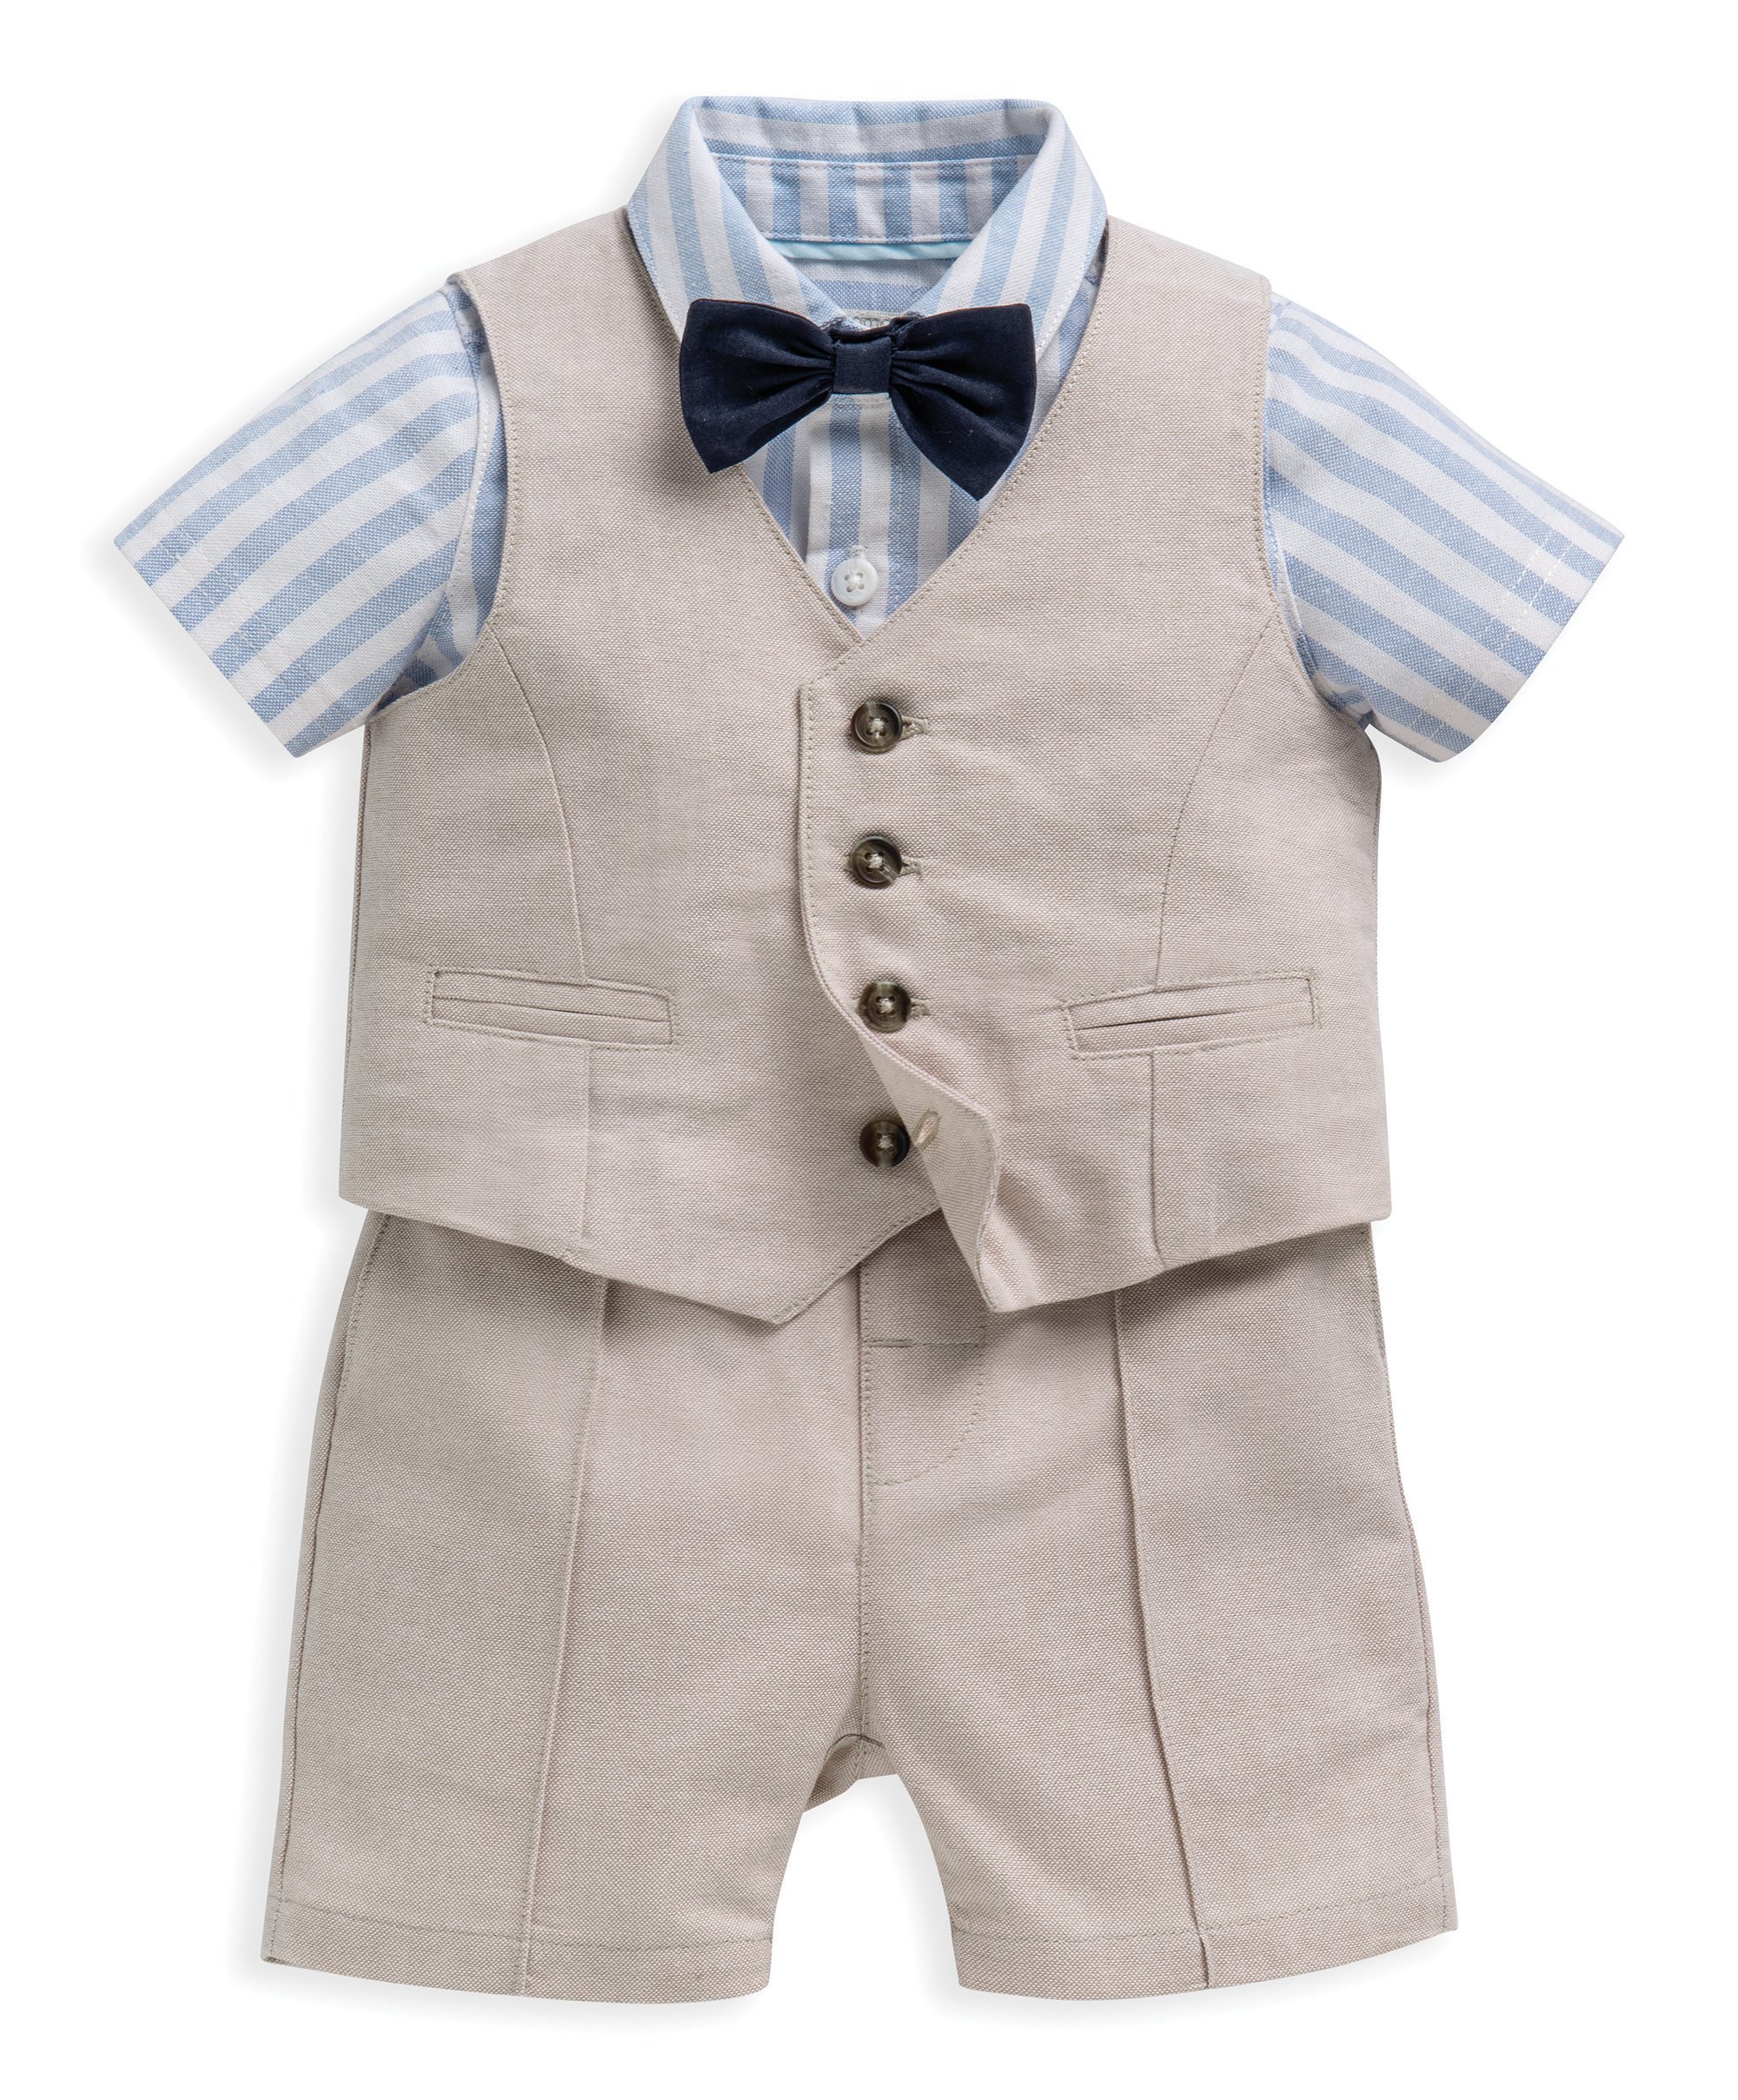 Buy 4 Piece Linen Waistcoat & Shorts Set for AED 209.00 - Sets ...